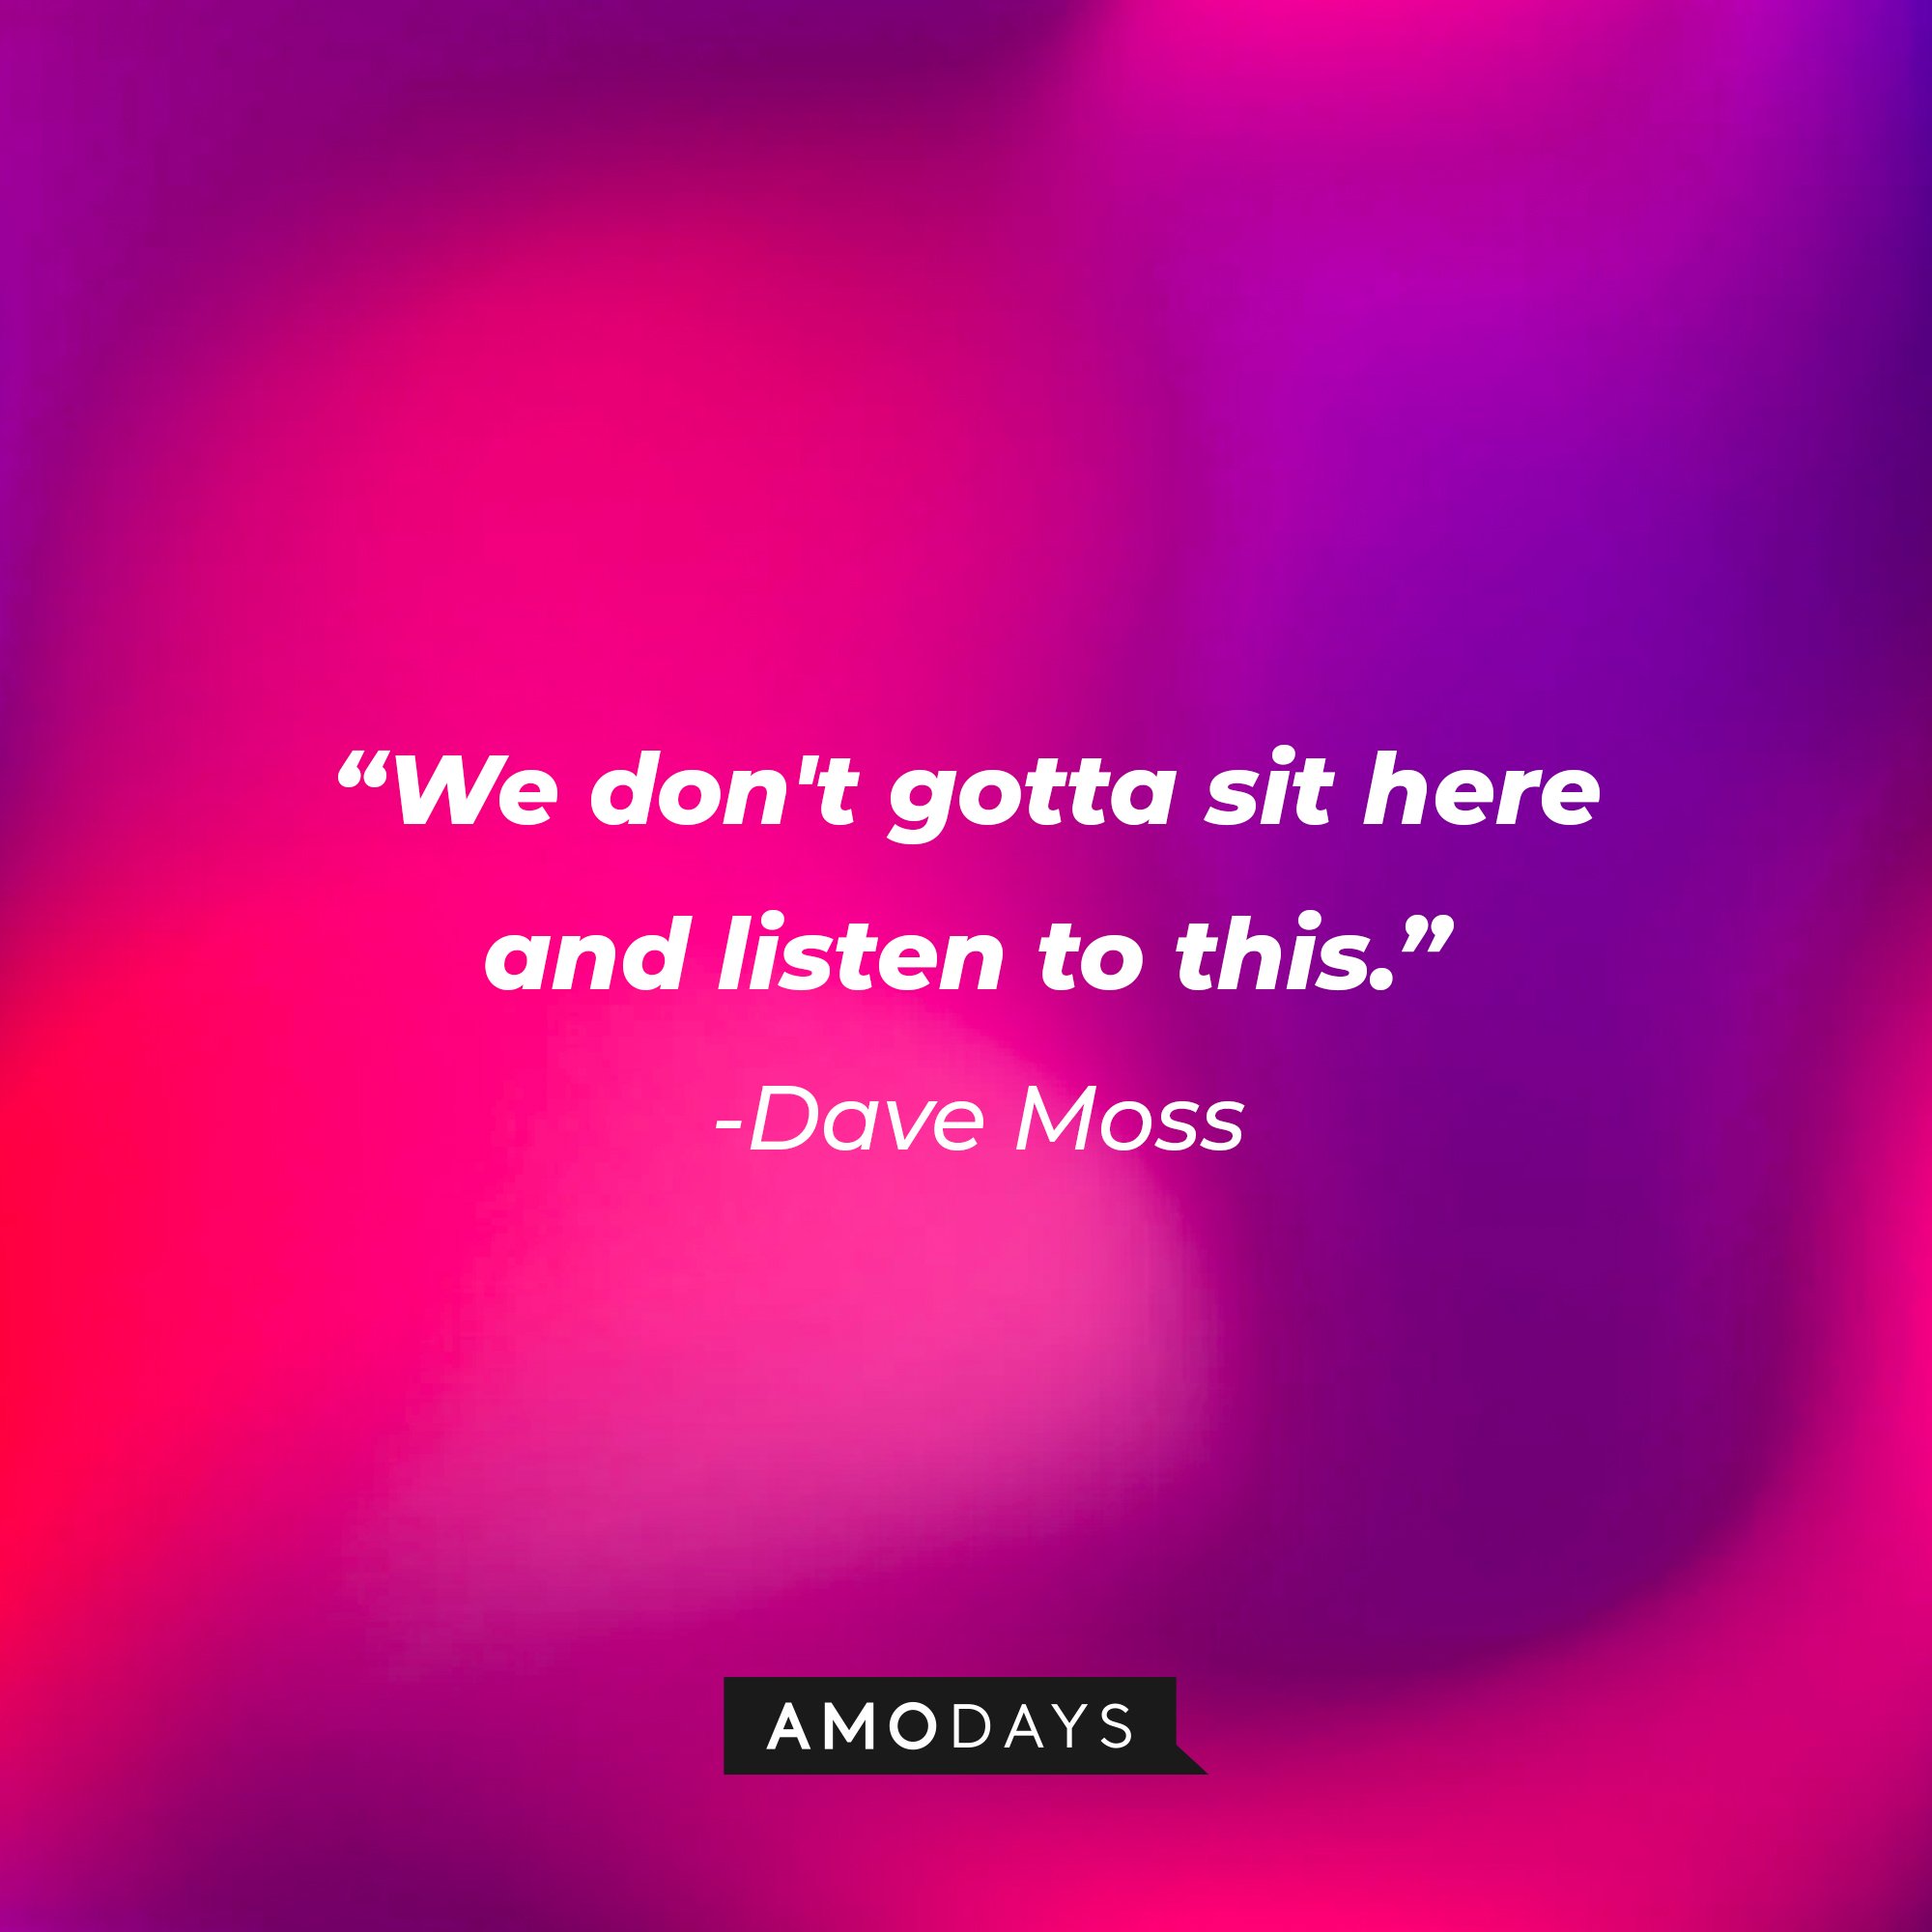 Dave Moss’s quote: "We don't gotta sit here and listen to this." | Image: AmoDays